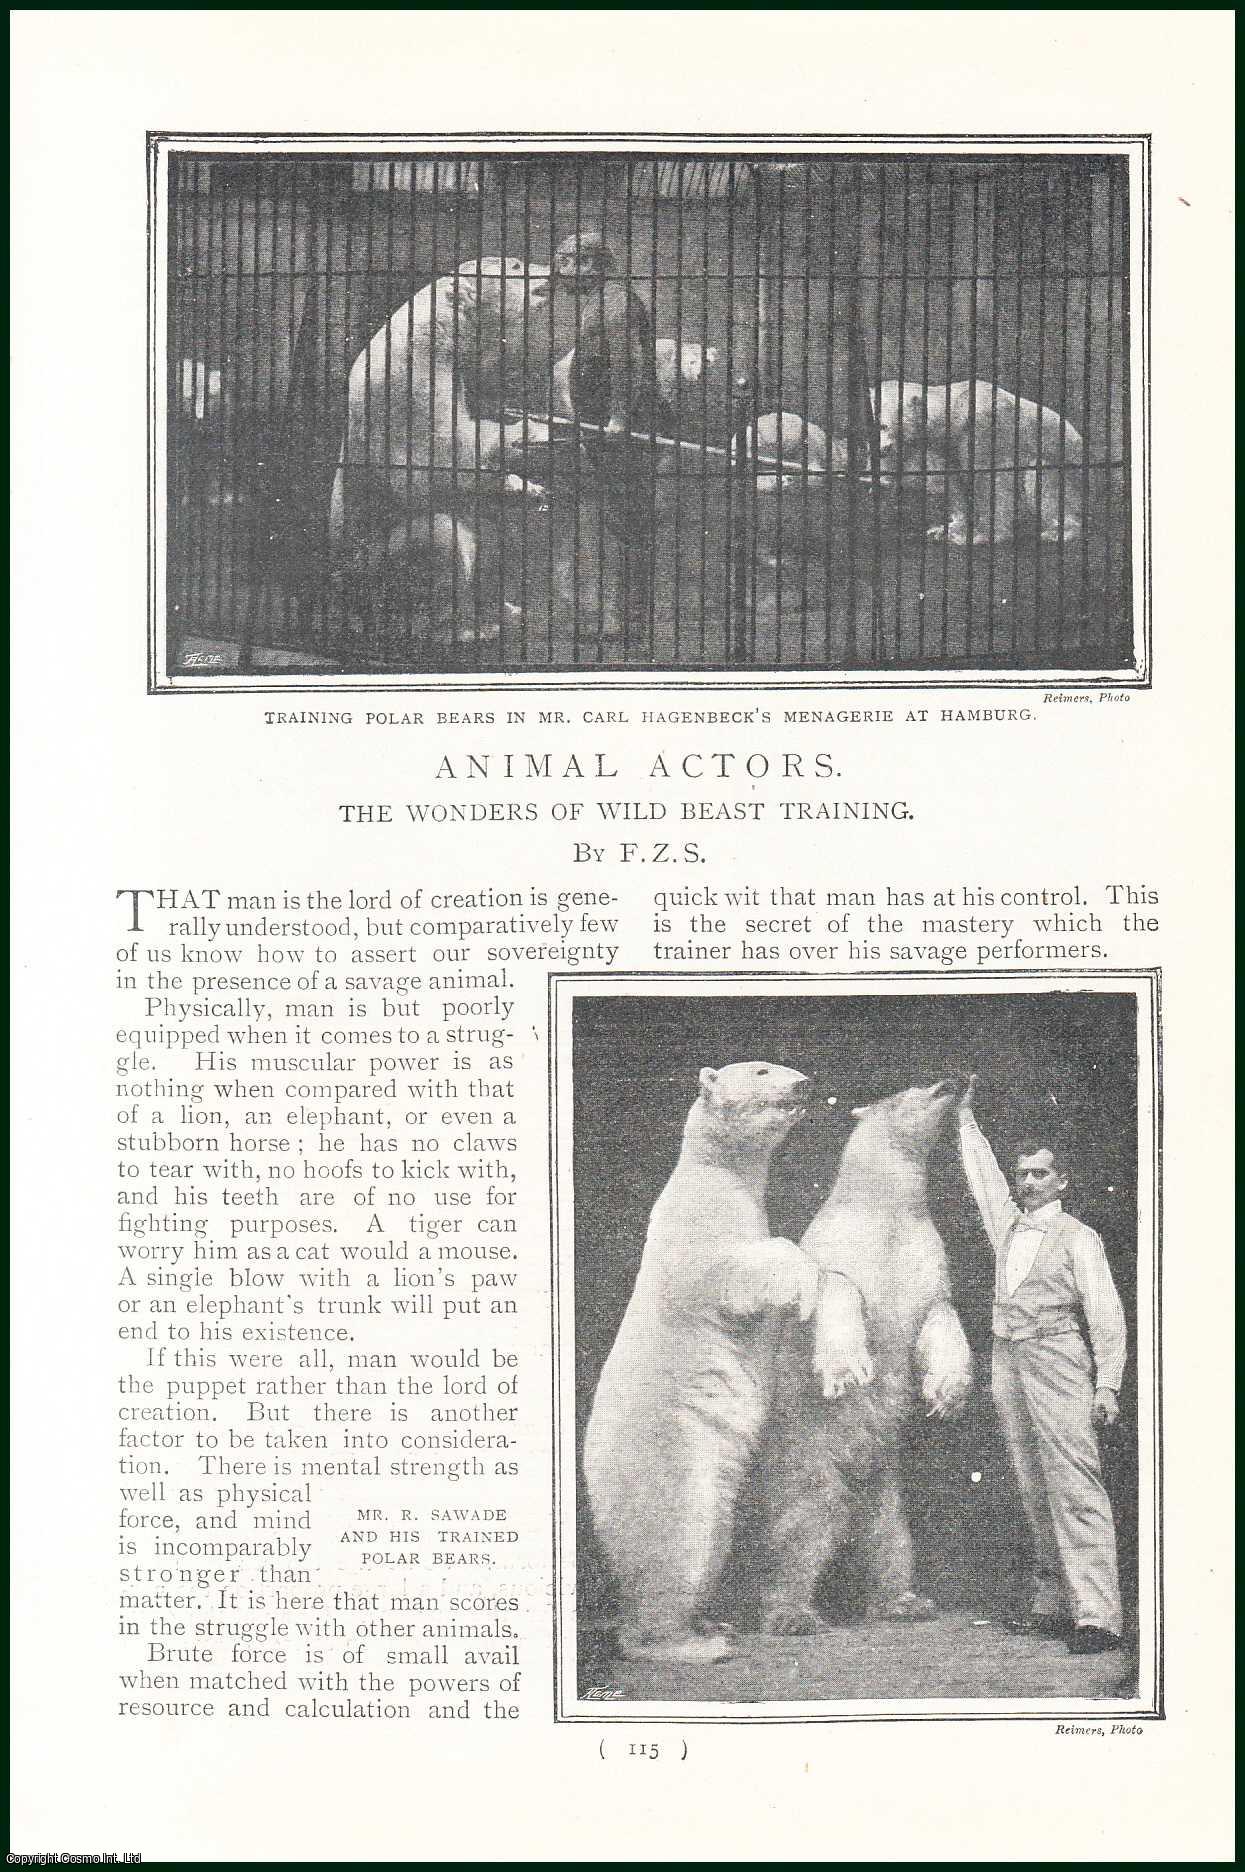 S., F. Z. - Animal Actors. The Wonders of Wild Beast Training. A rare original article from the Harmsworth London Magazine, 1901.